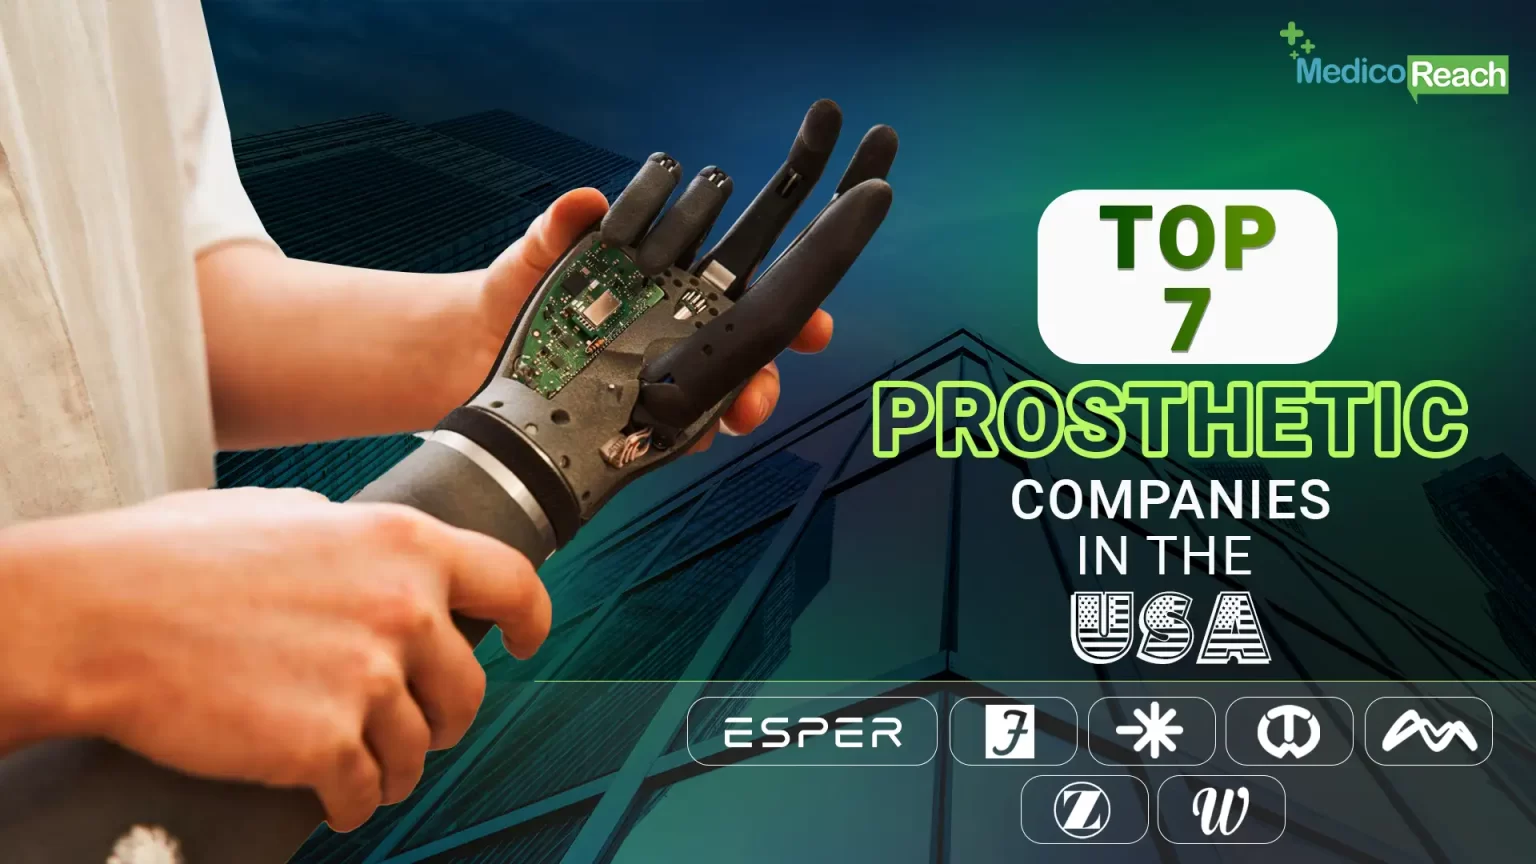 Top 7 Prosthetic Companies in the USA